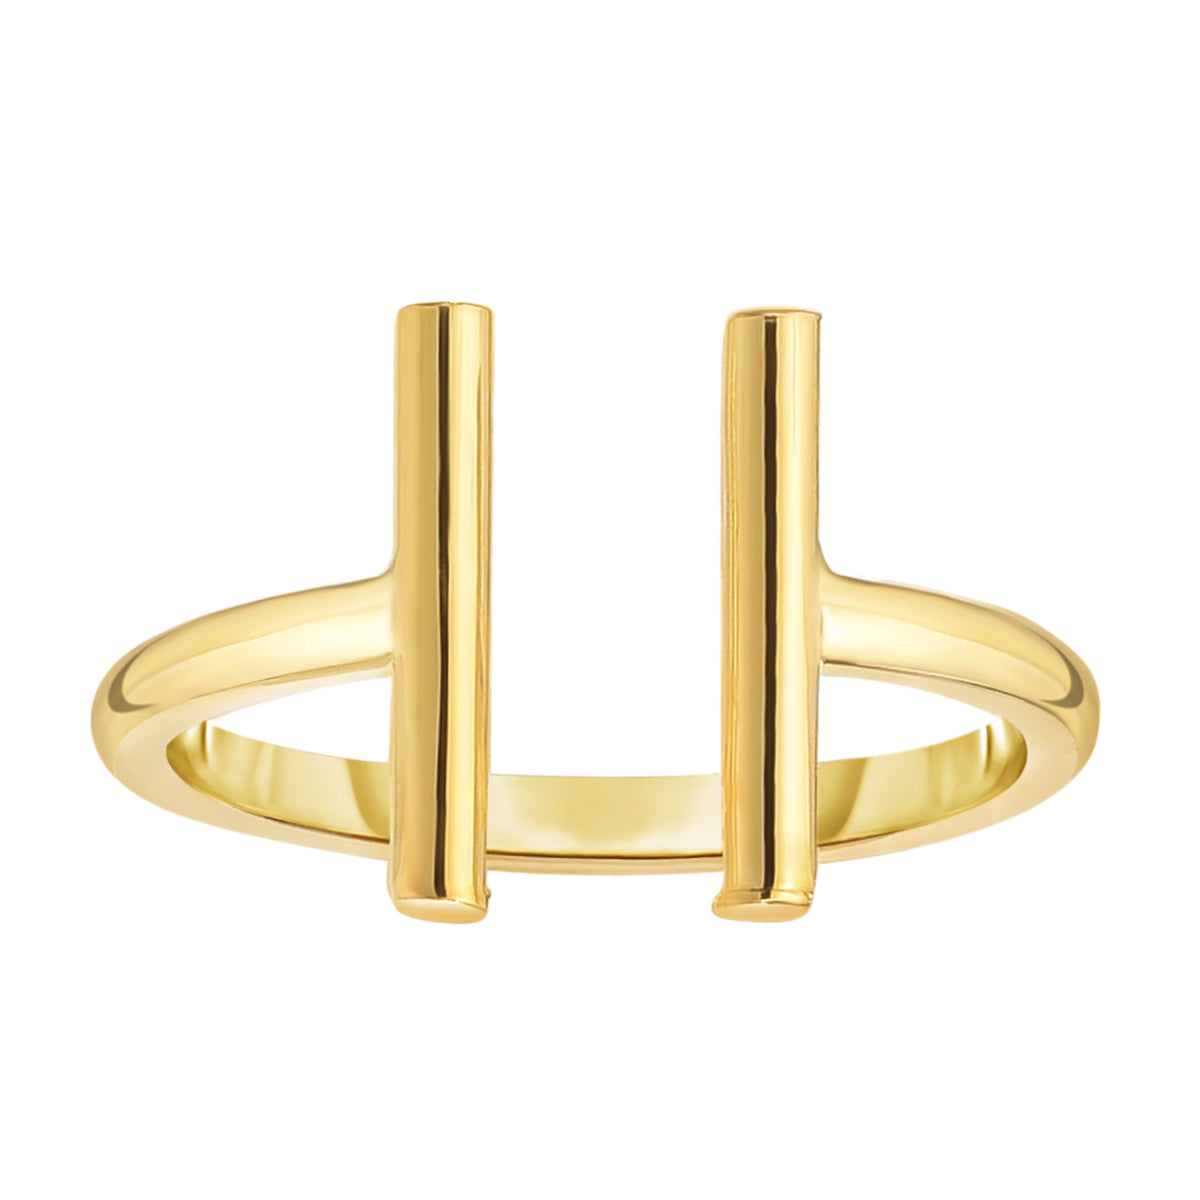 14K Yellow Gold Open Ring With Parallel T Bar Ends, Size 7 fine designer jewelry for men and women